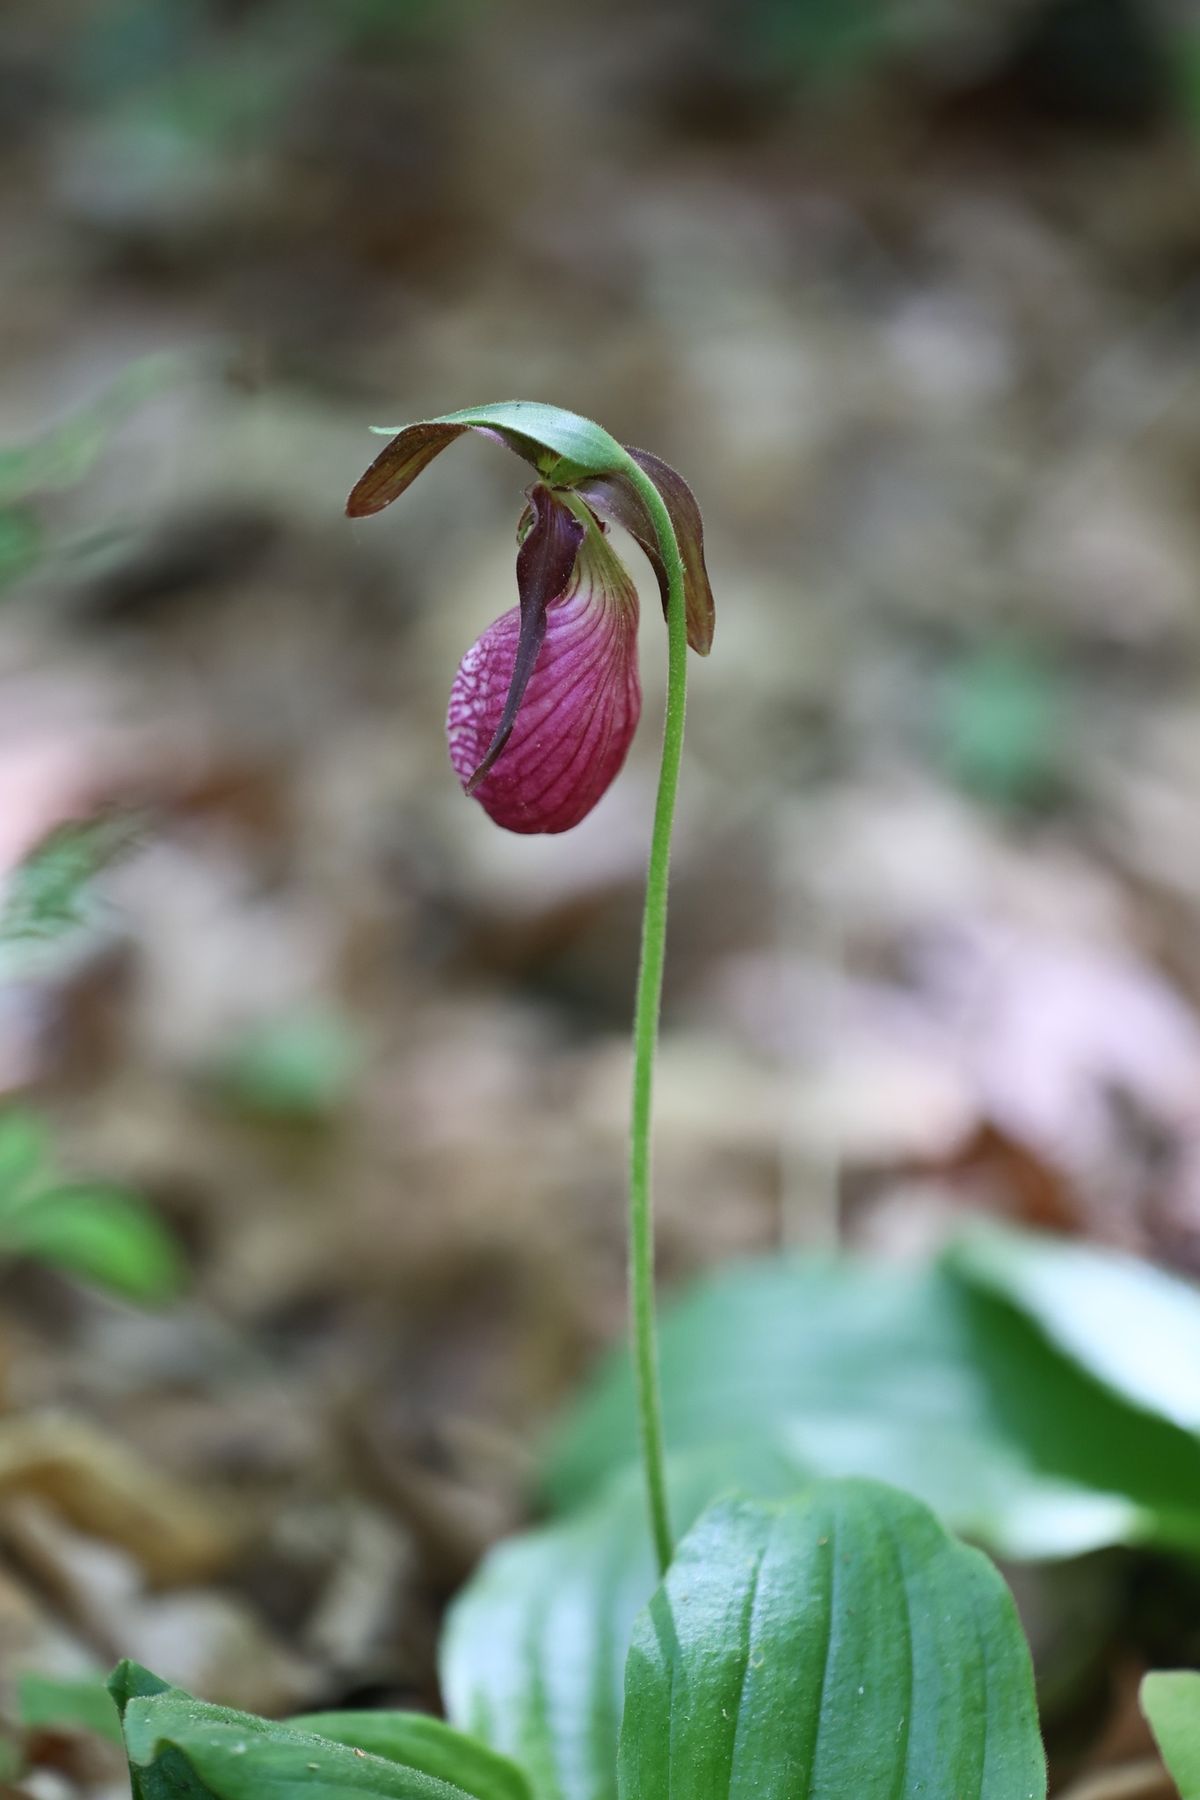 [RESCHEDULED] Lady Slipper & Wildflower Walk at the Peace Sanctuary